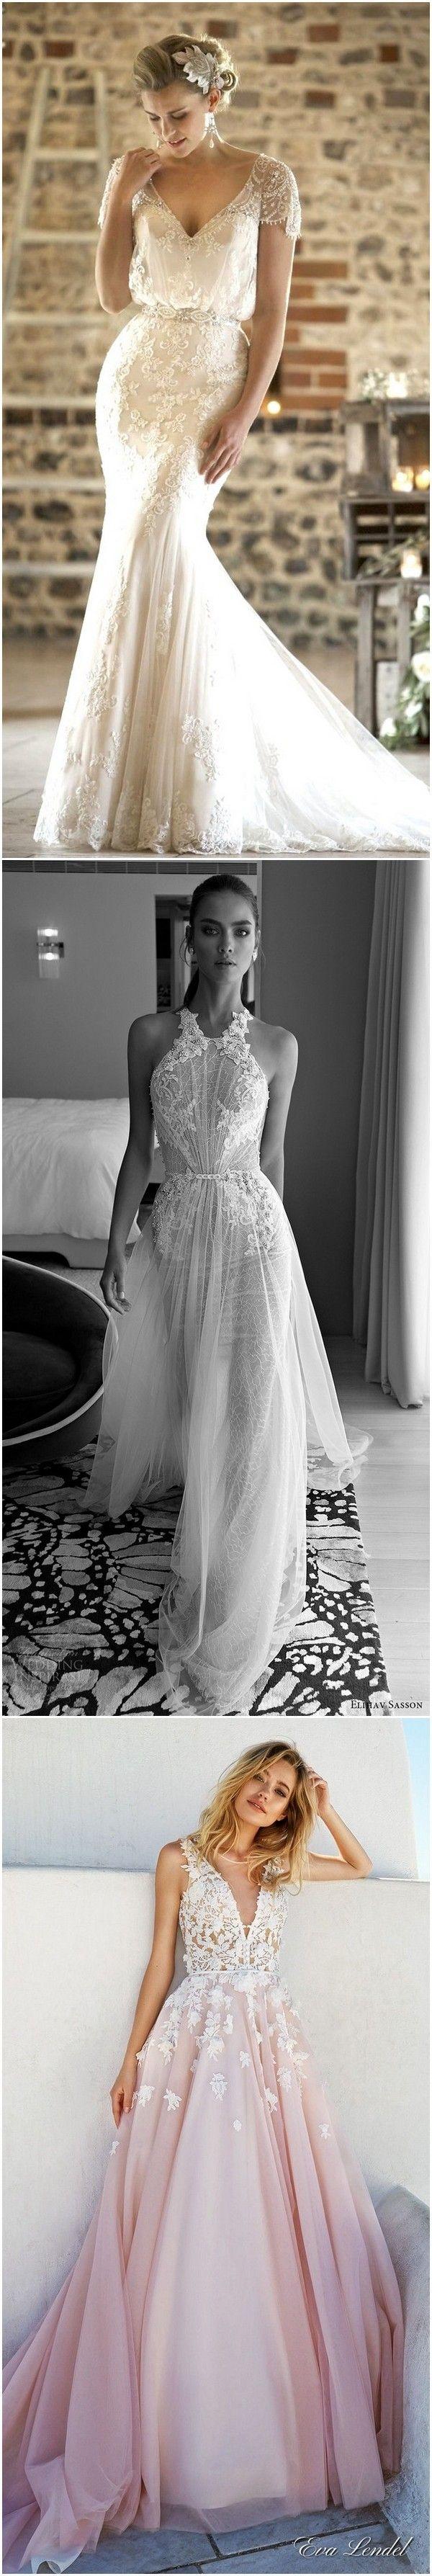 Wedding - Top 20 Vintage Wedding Dresses For 2017 Trends - Page 2 Of 4